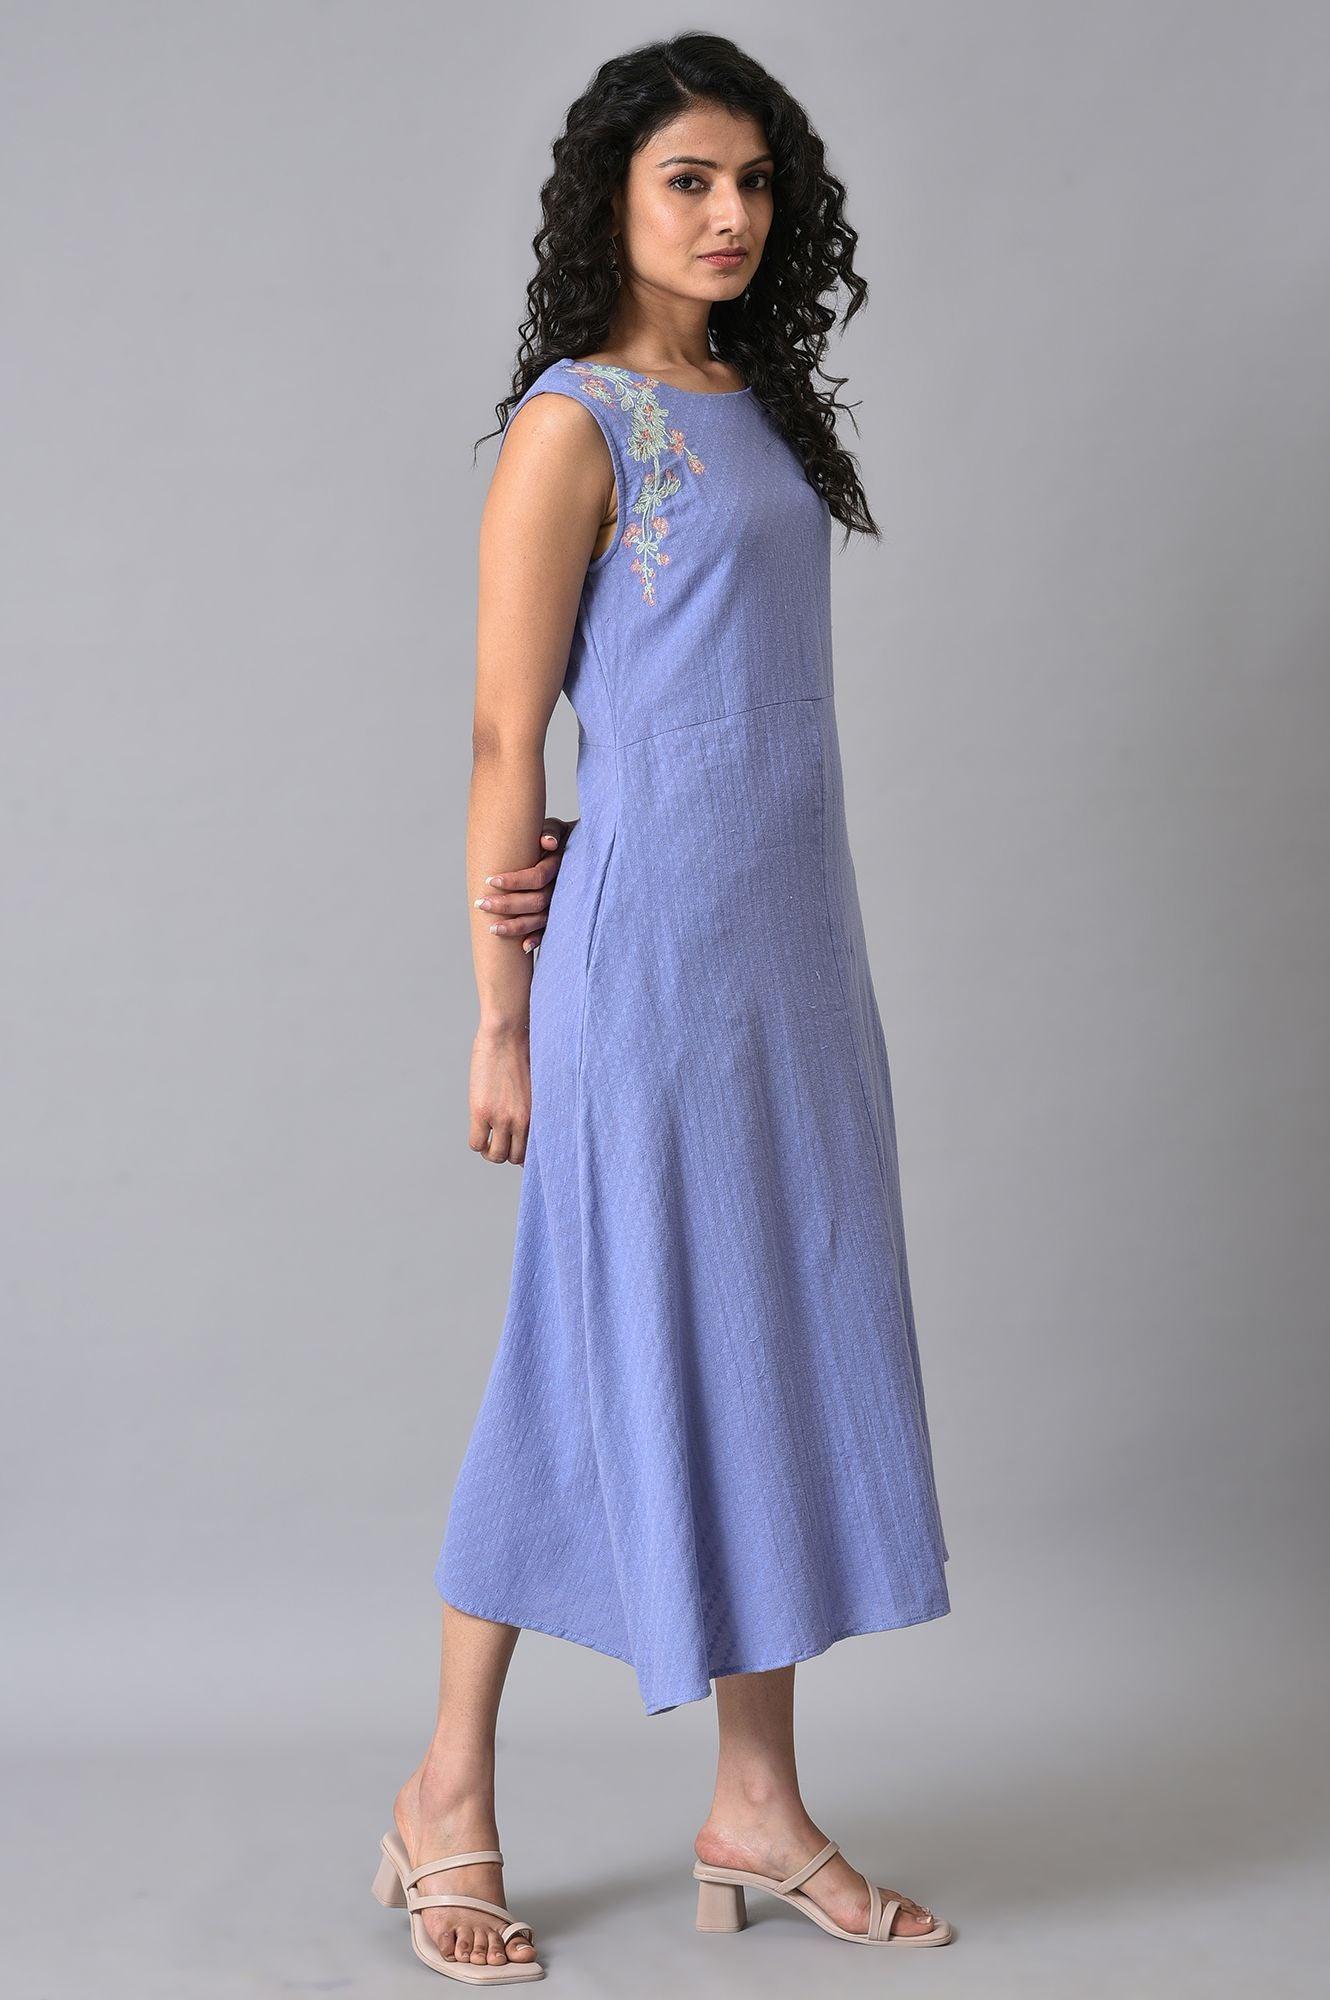 Lilac Textured Embroidered Dress - wforwoman